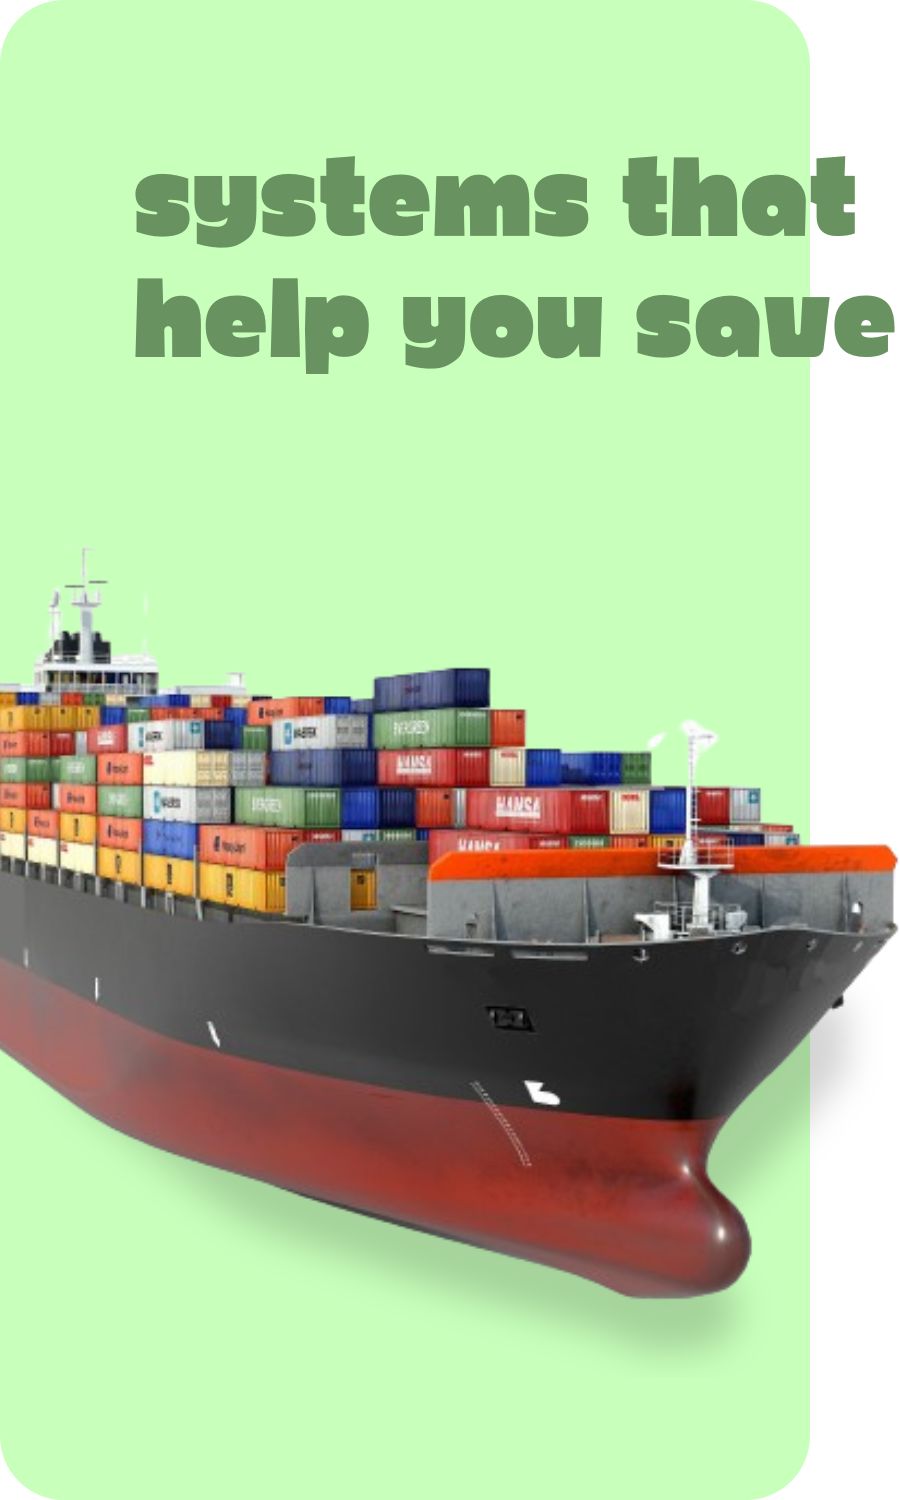 Systems that help you save costs - Ecosail